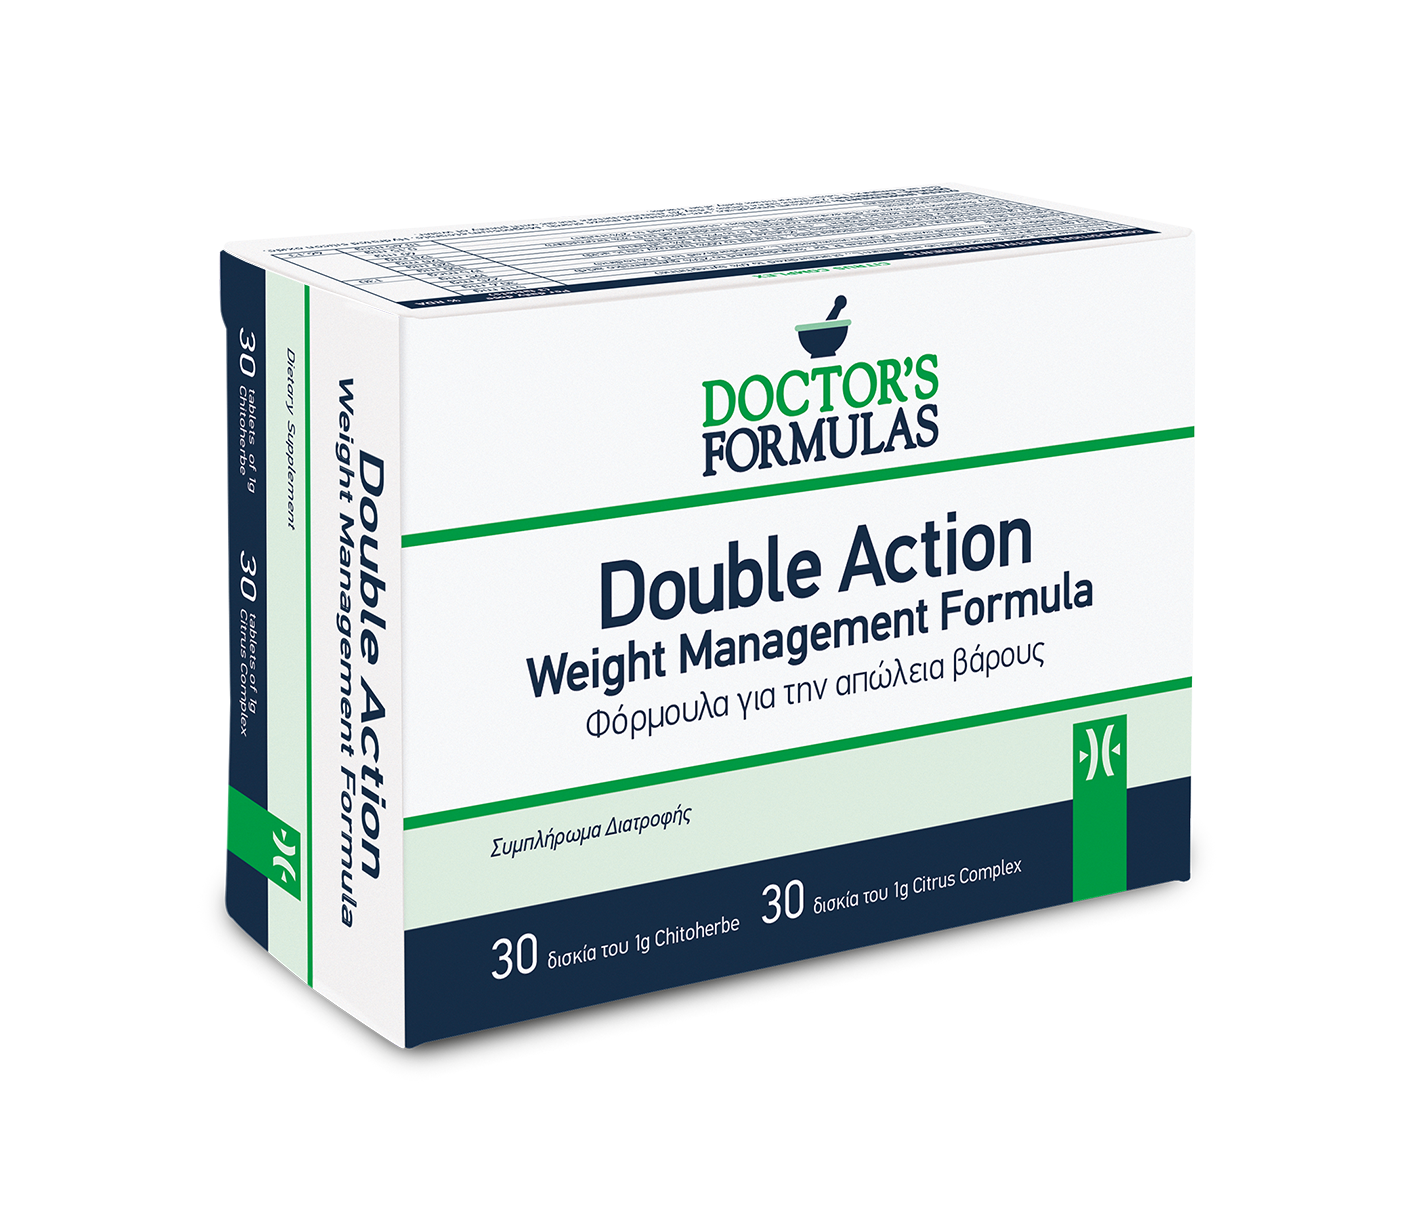 Doctor's Formulas Double Action Weight Management Formula 60 Δισκία